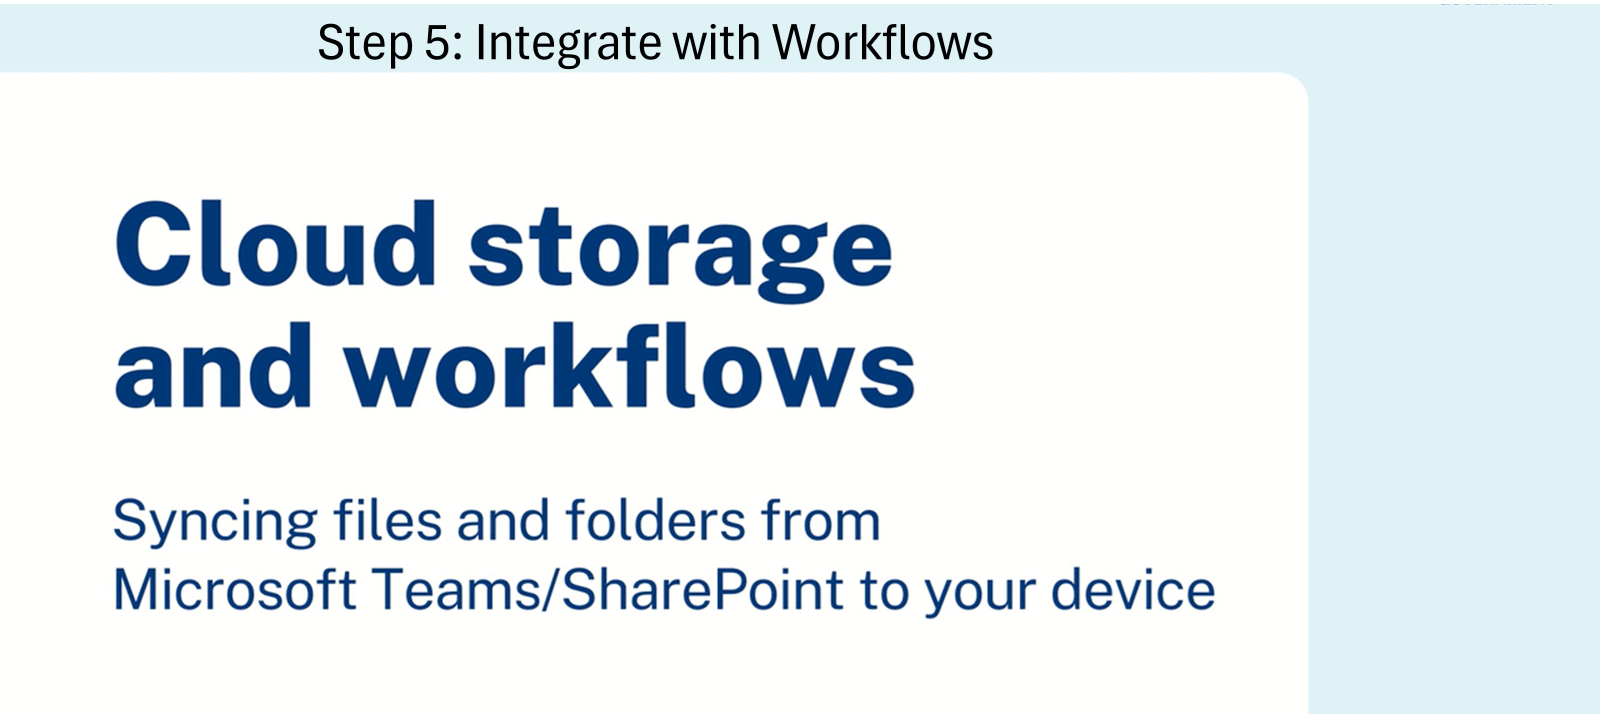 Step 5 Integrate with workflow